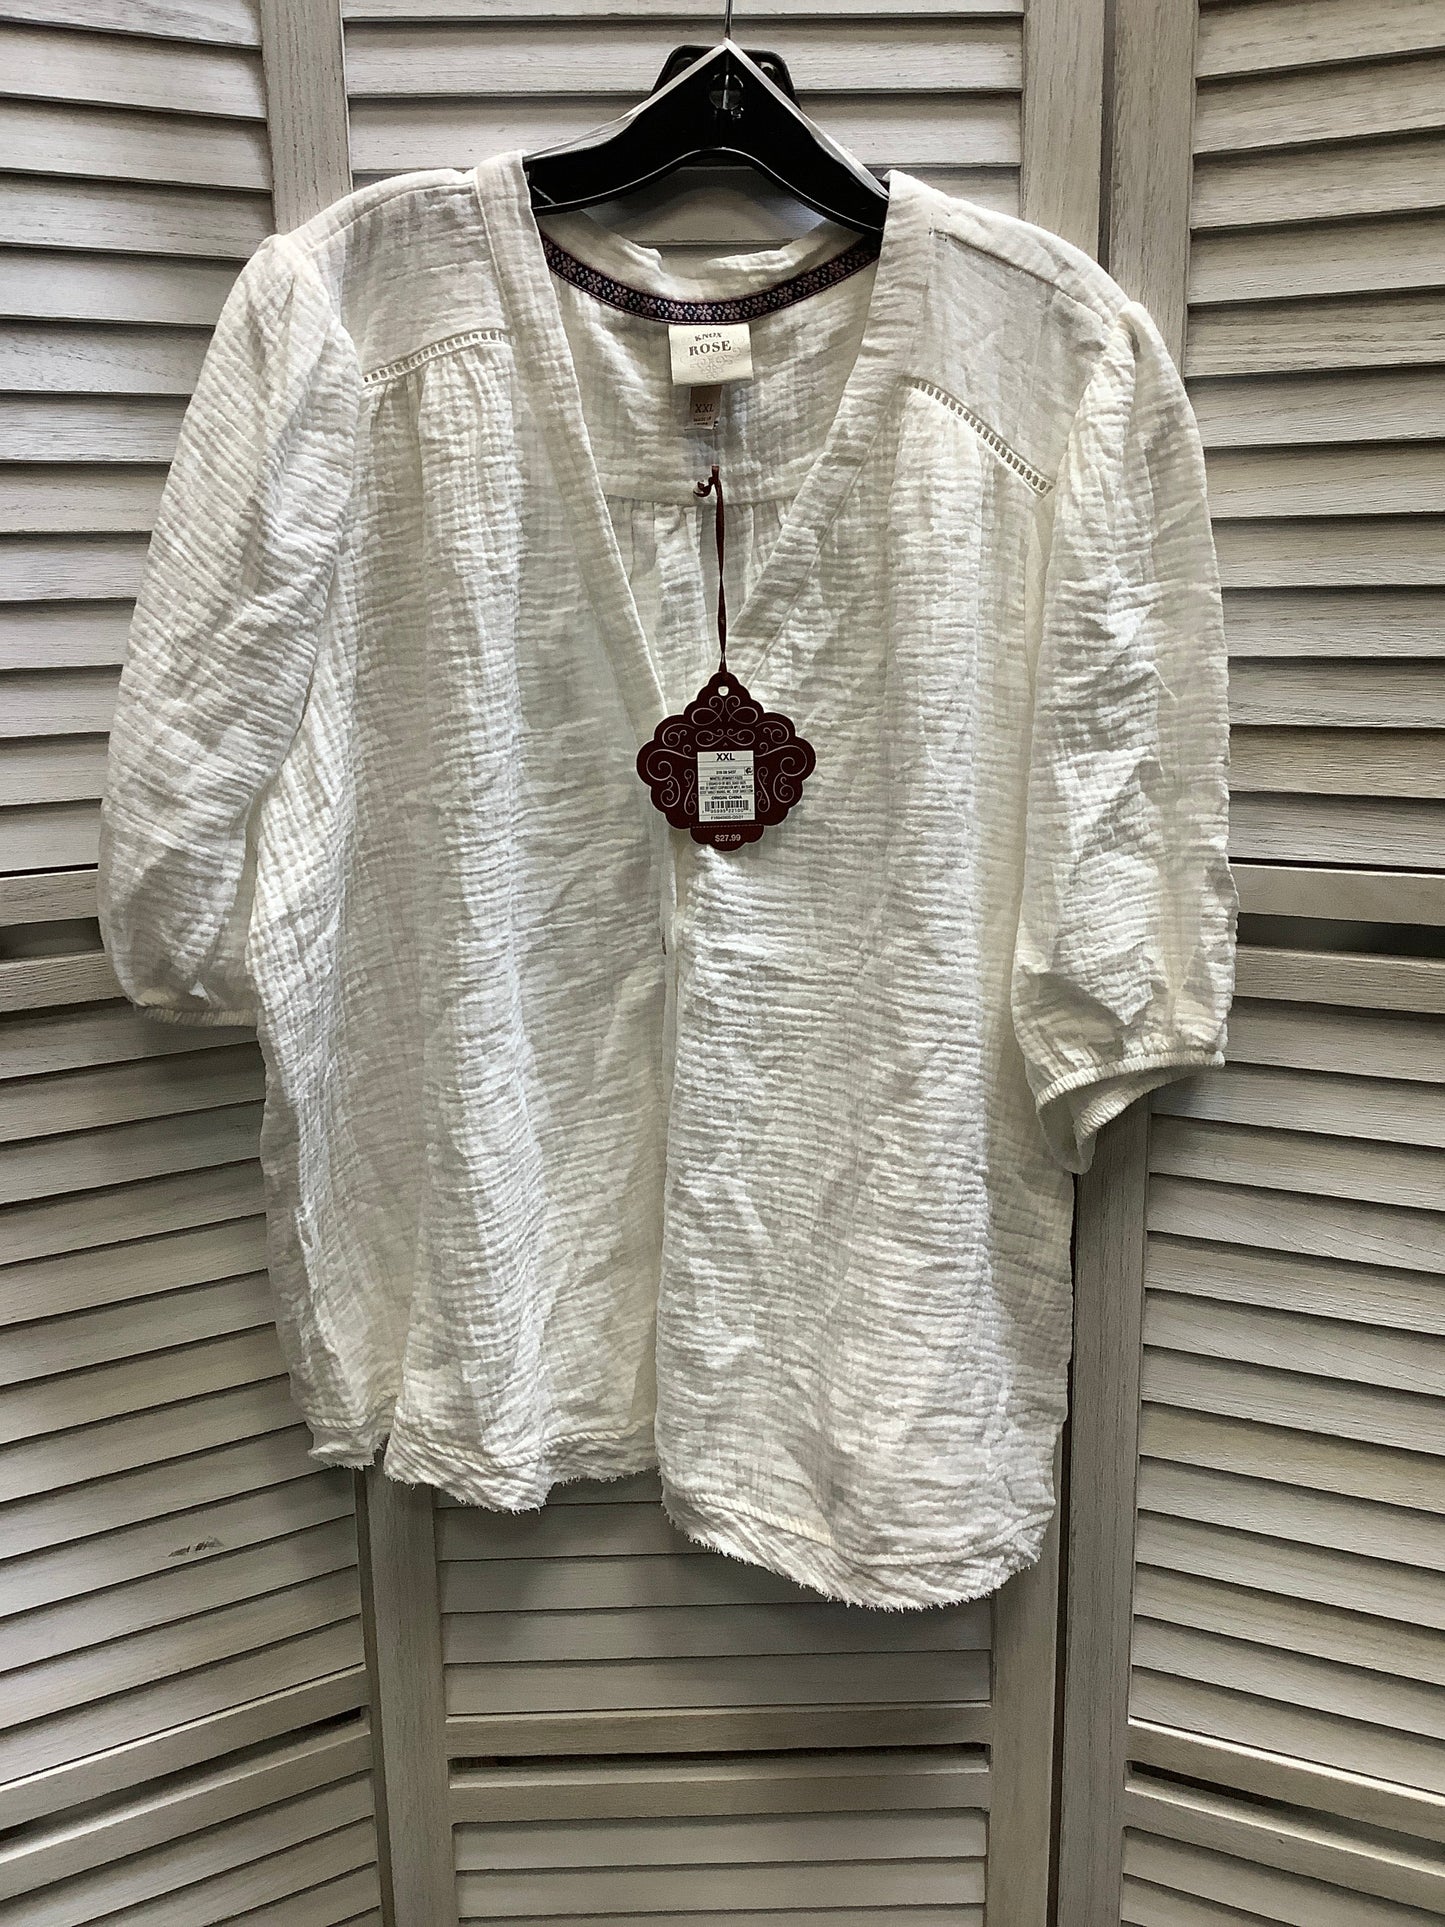 White Top 3/4 Sleeve Knox Rose, Size Xxl